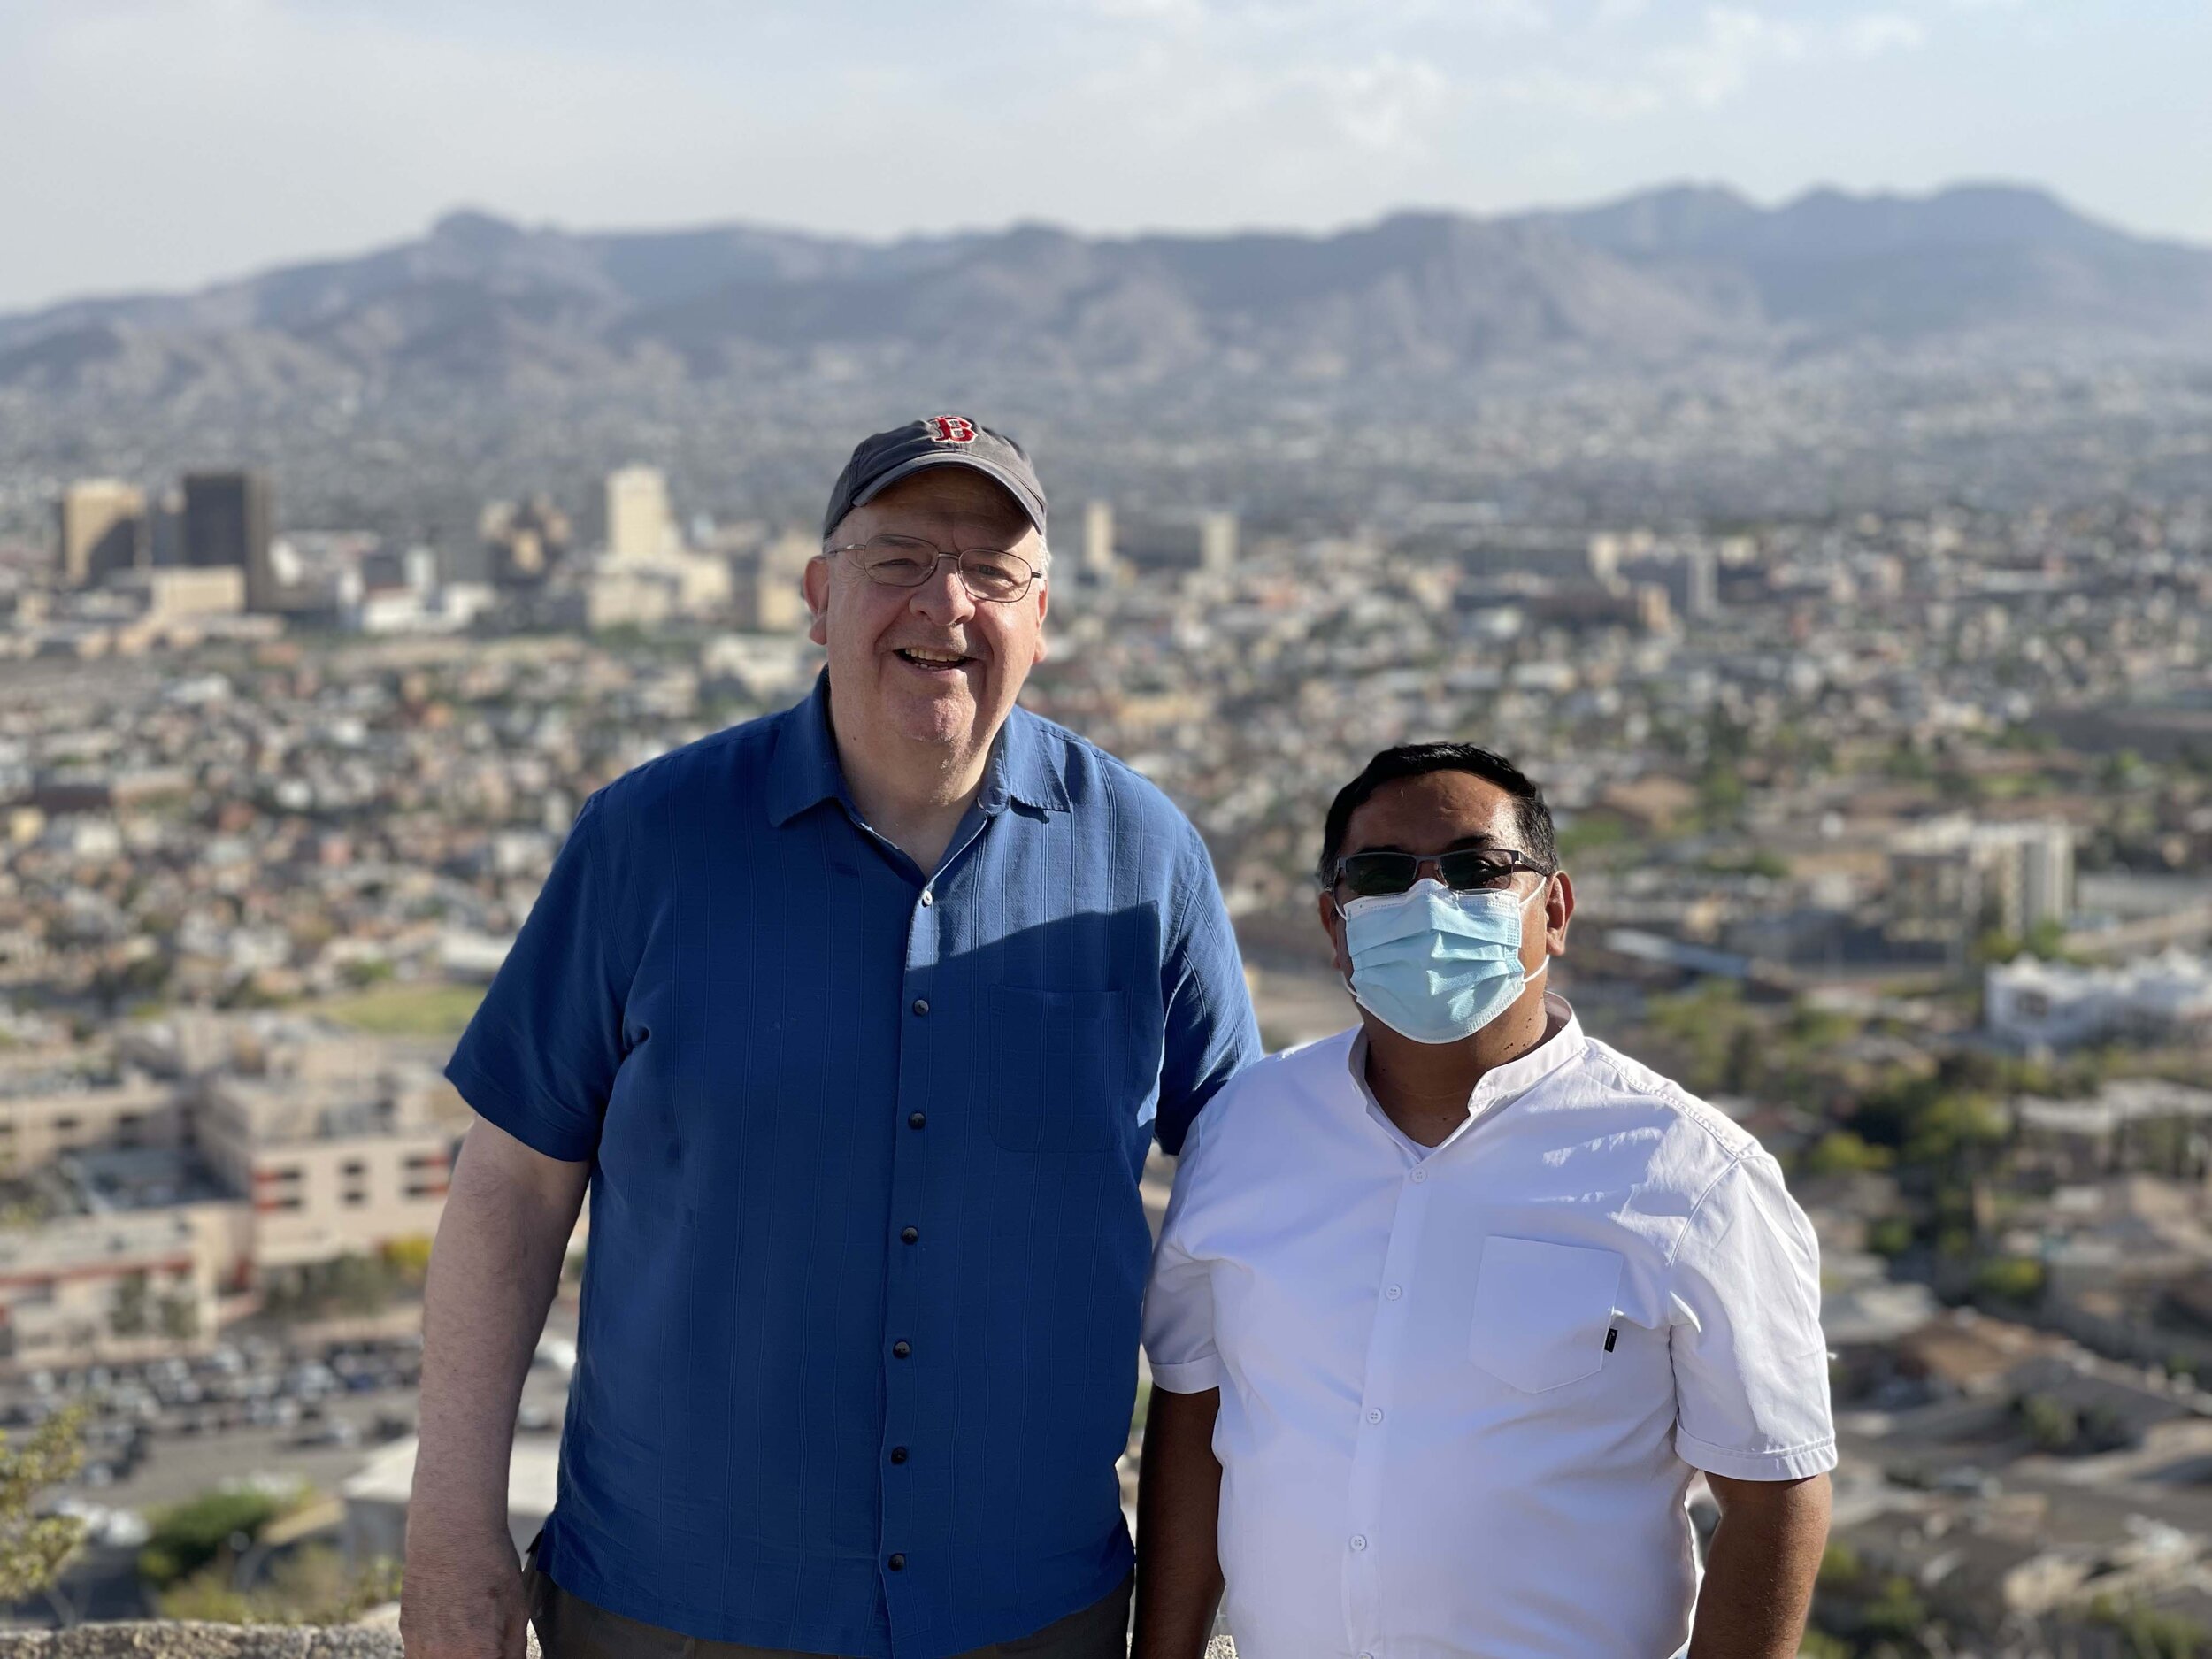 Fr. Dennis in El Paso with Fr. Marciano, one of the founding members of the new community